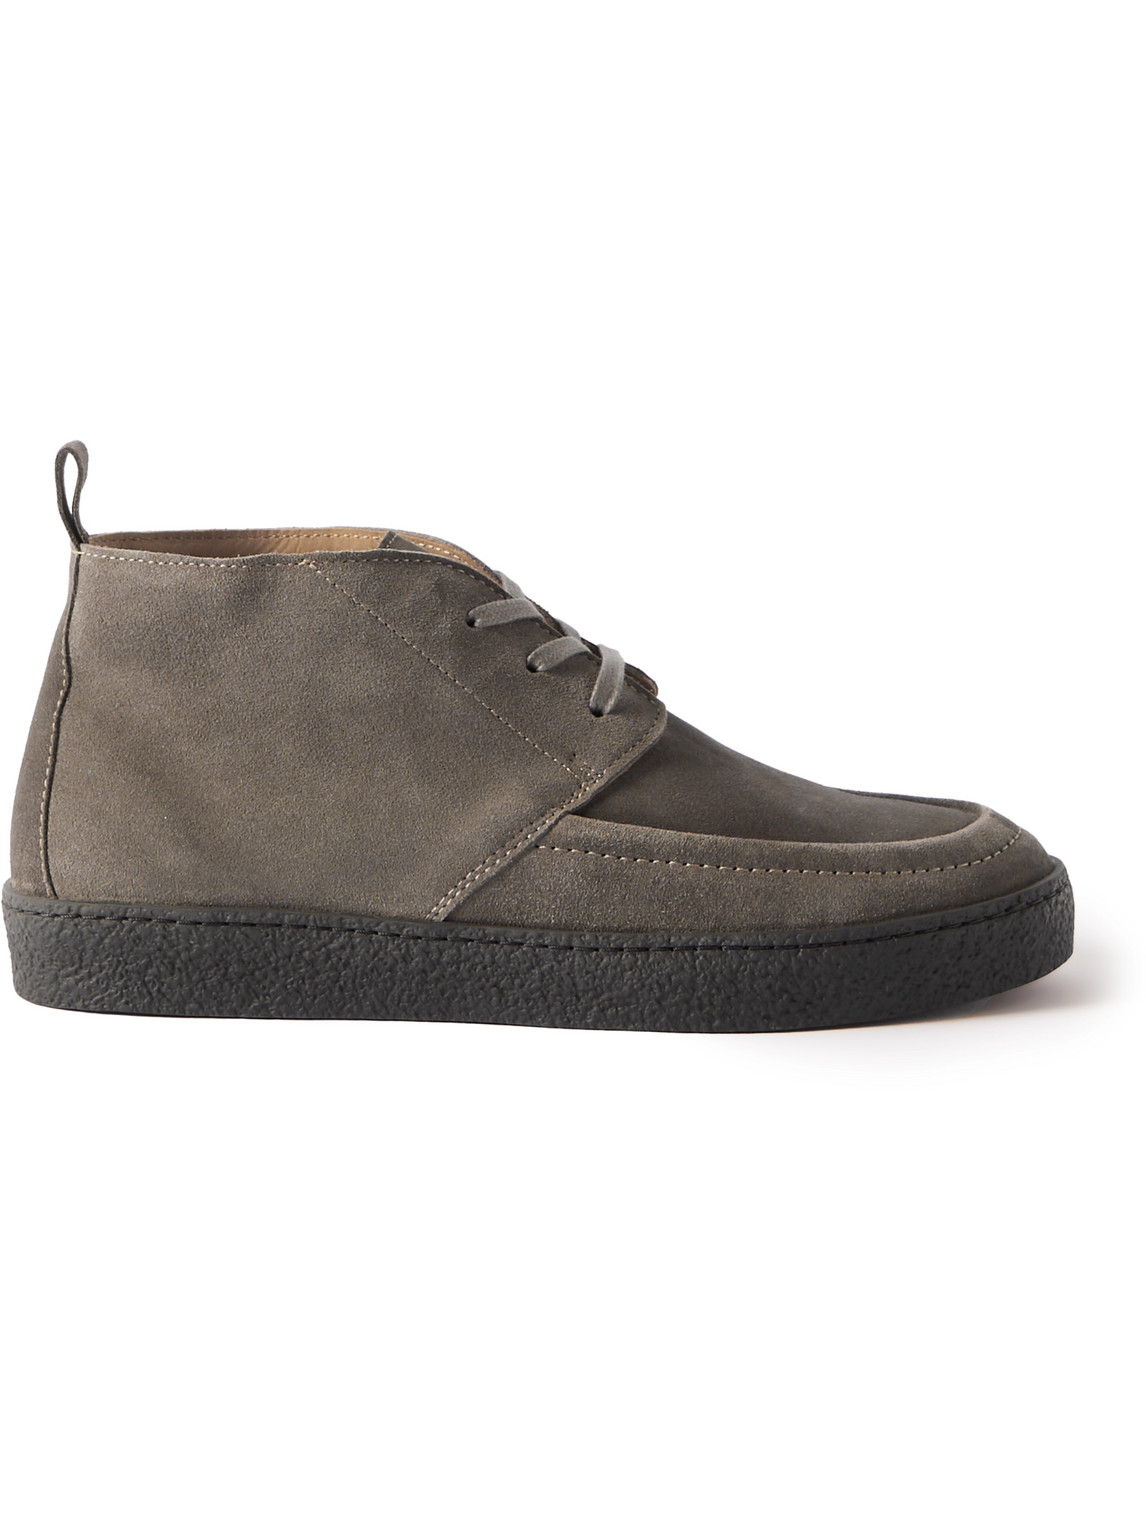 Mr P Larry Regenerated Suede By Evolo® Chukka Boots In Gray